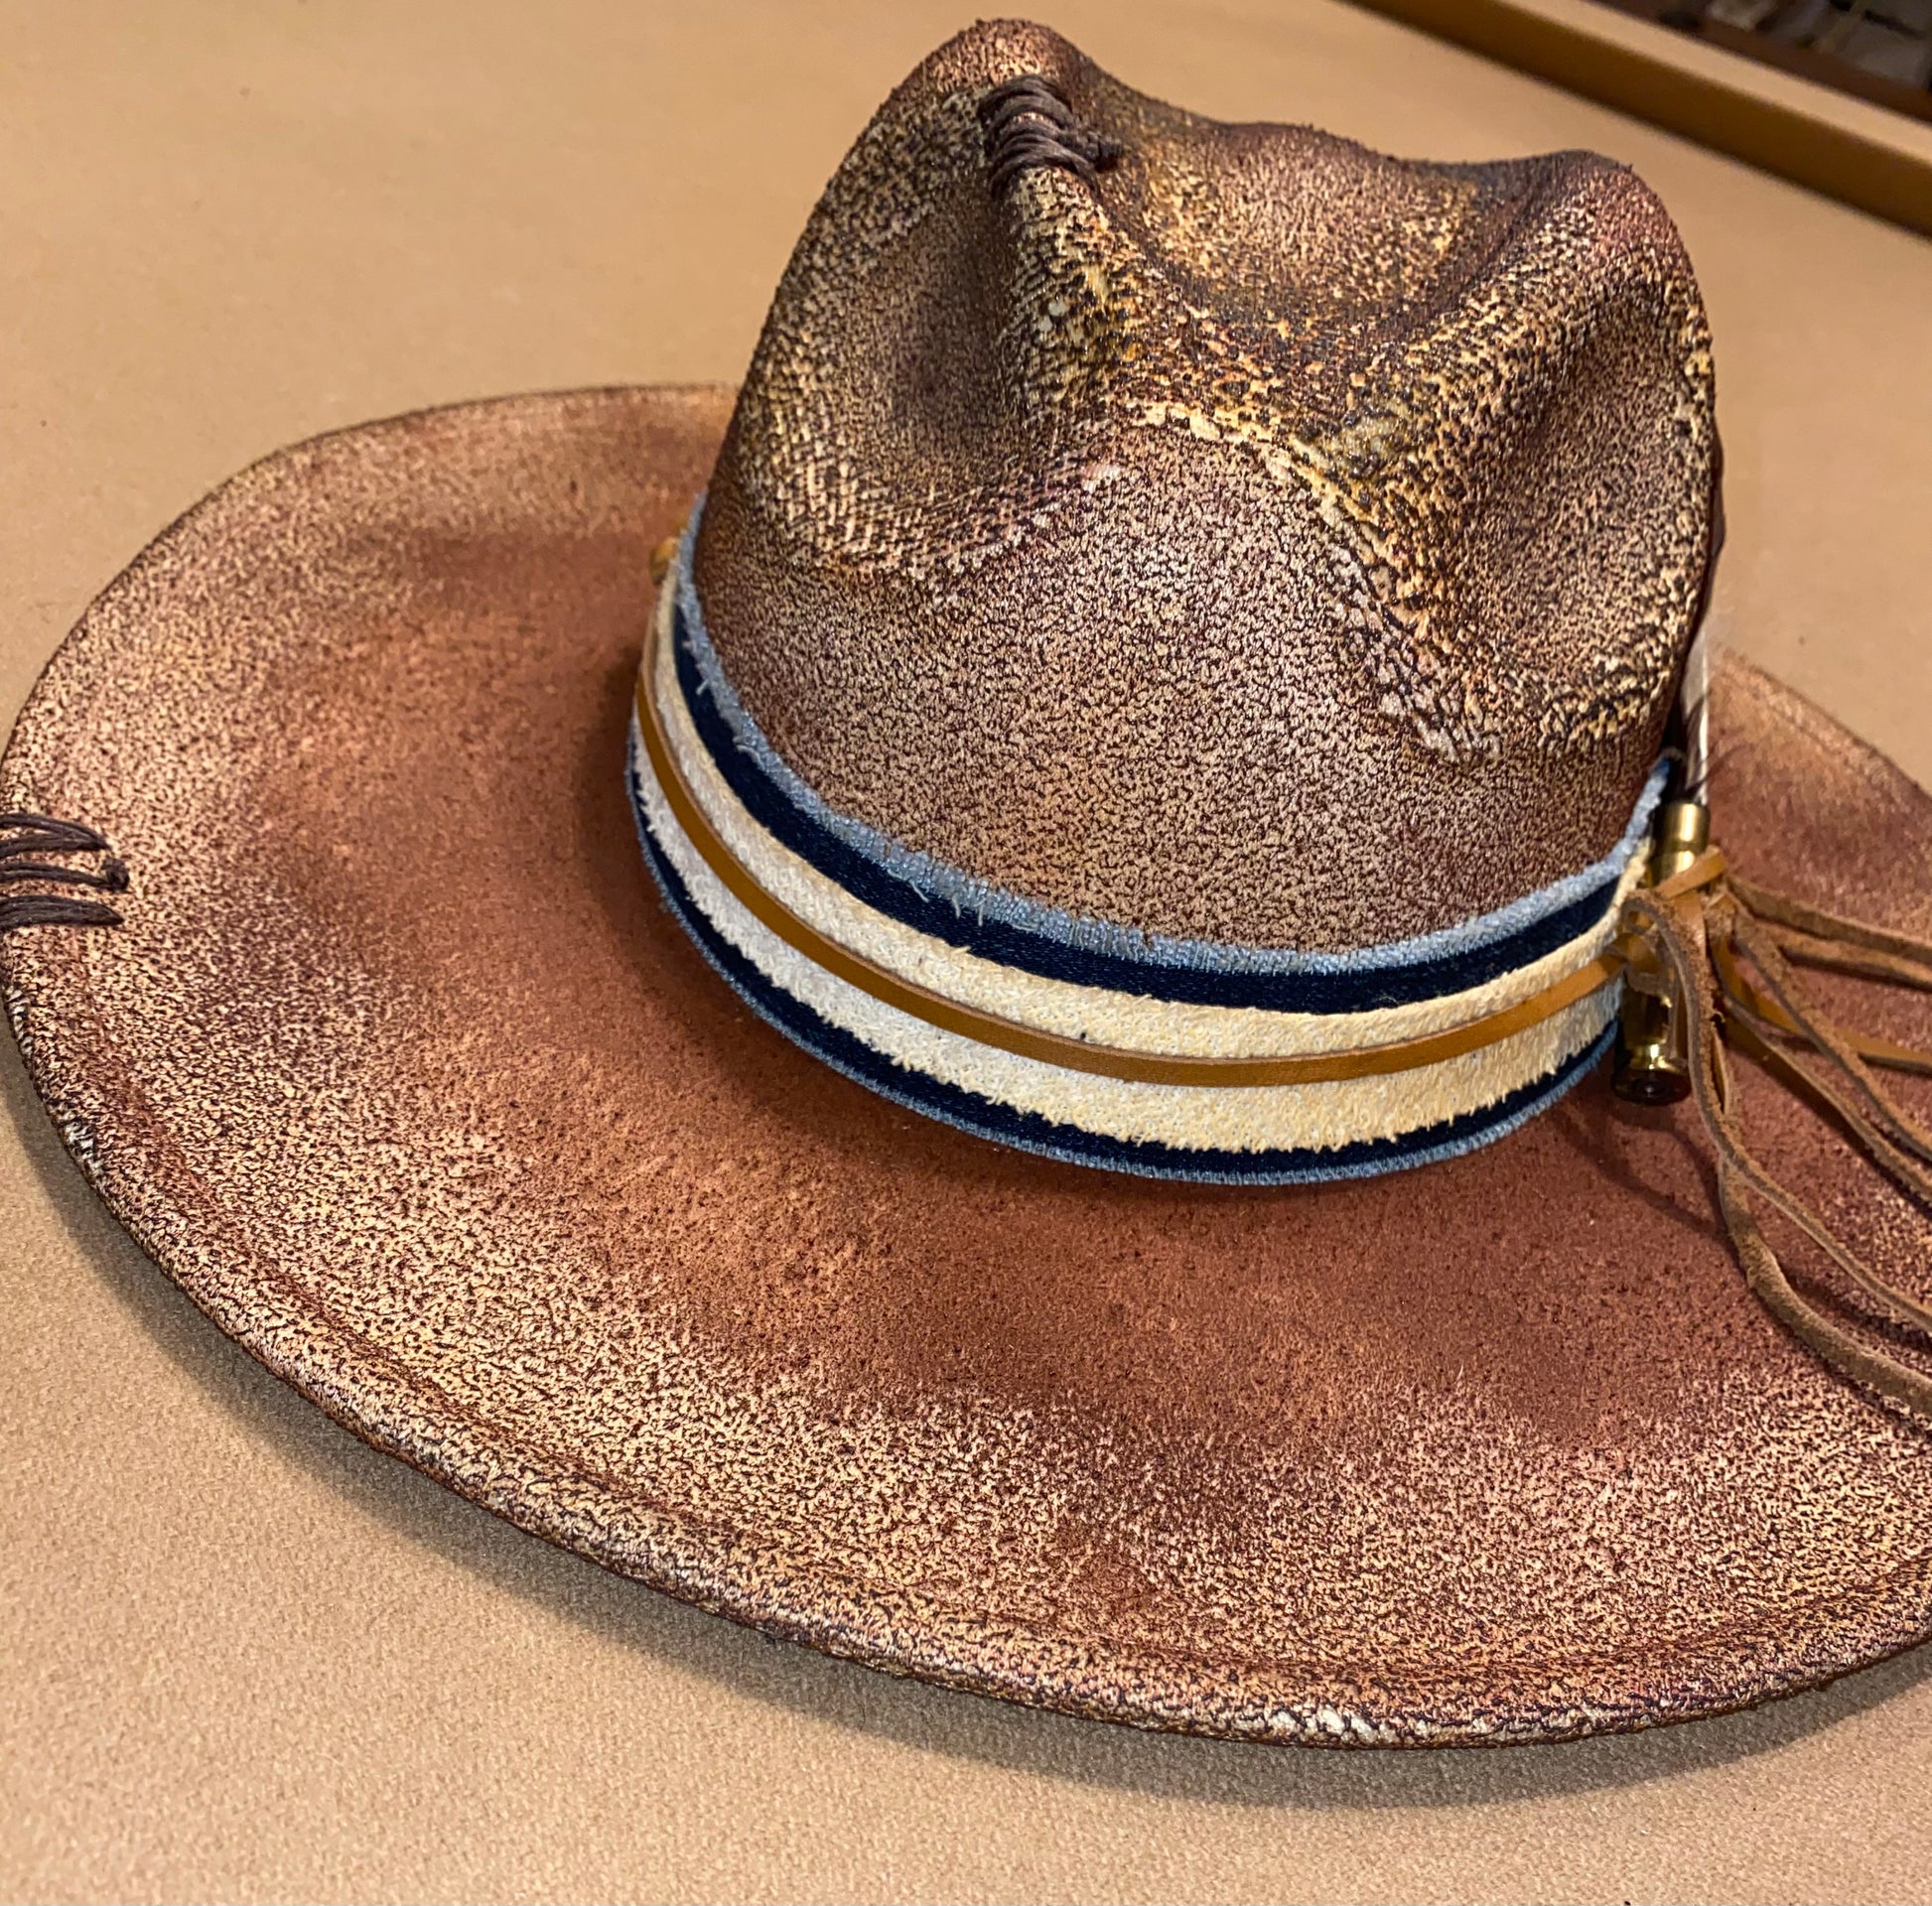 Bullet Proof Fedora - CountryFide Custom Accessories and Outdoors